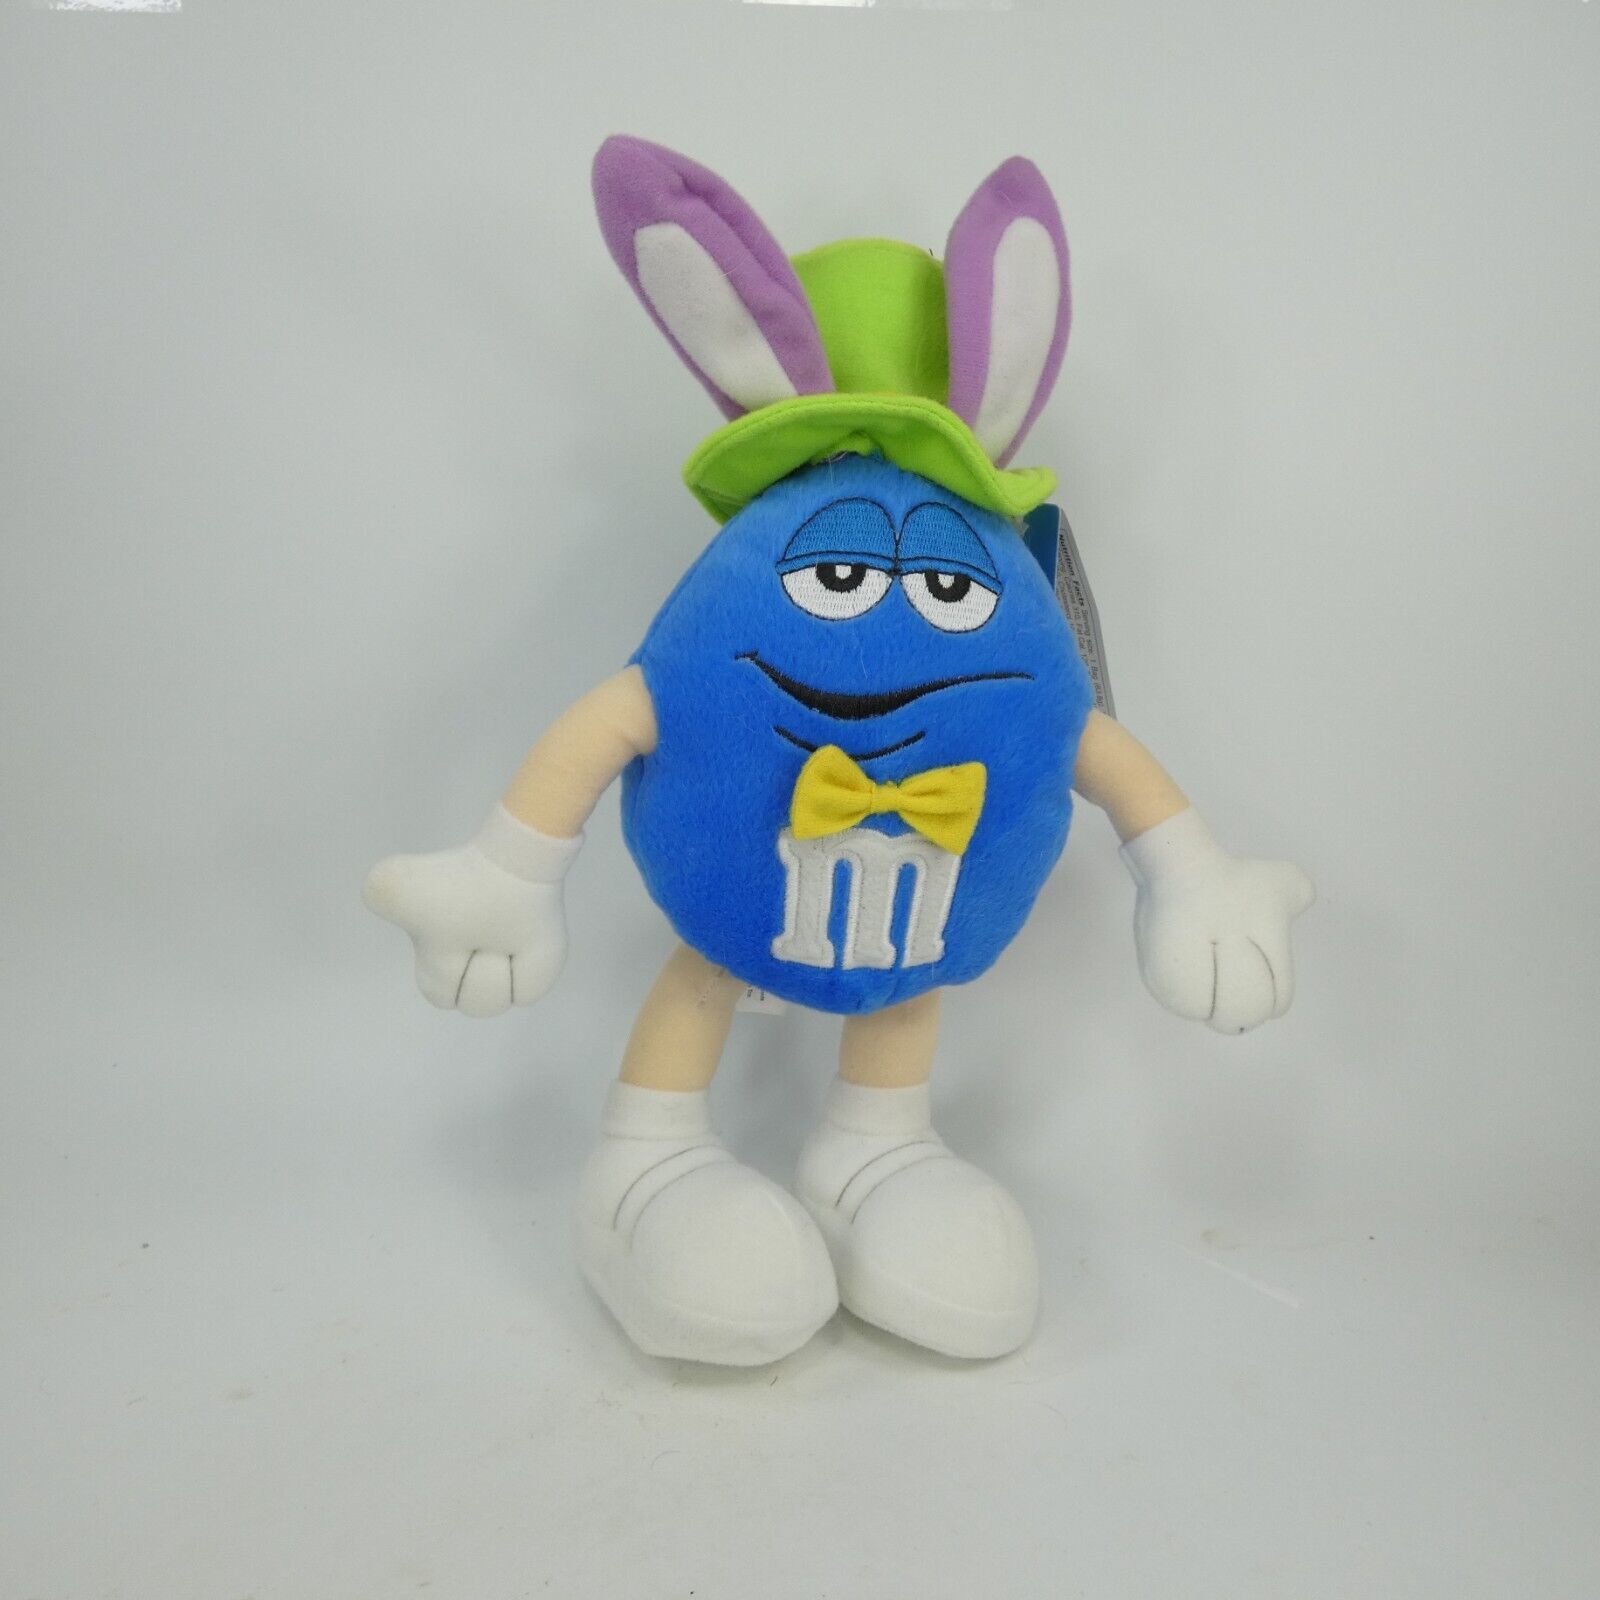 Galerie M&Ms Blue Bunny Hat Easter Poseable Plush Stuffed Doll /w tags 10” YJJFC - $10.00